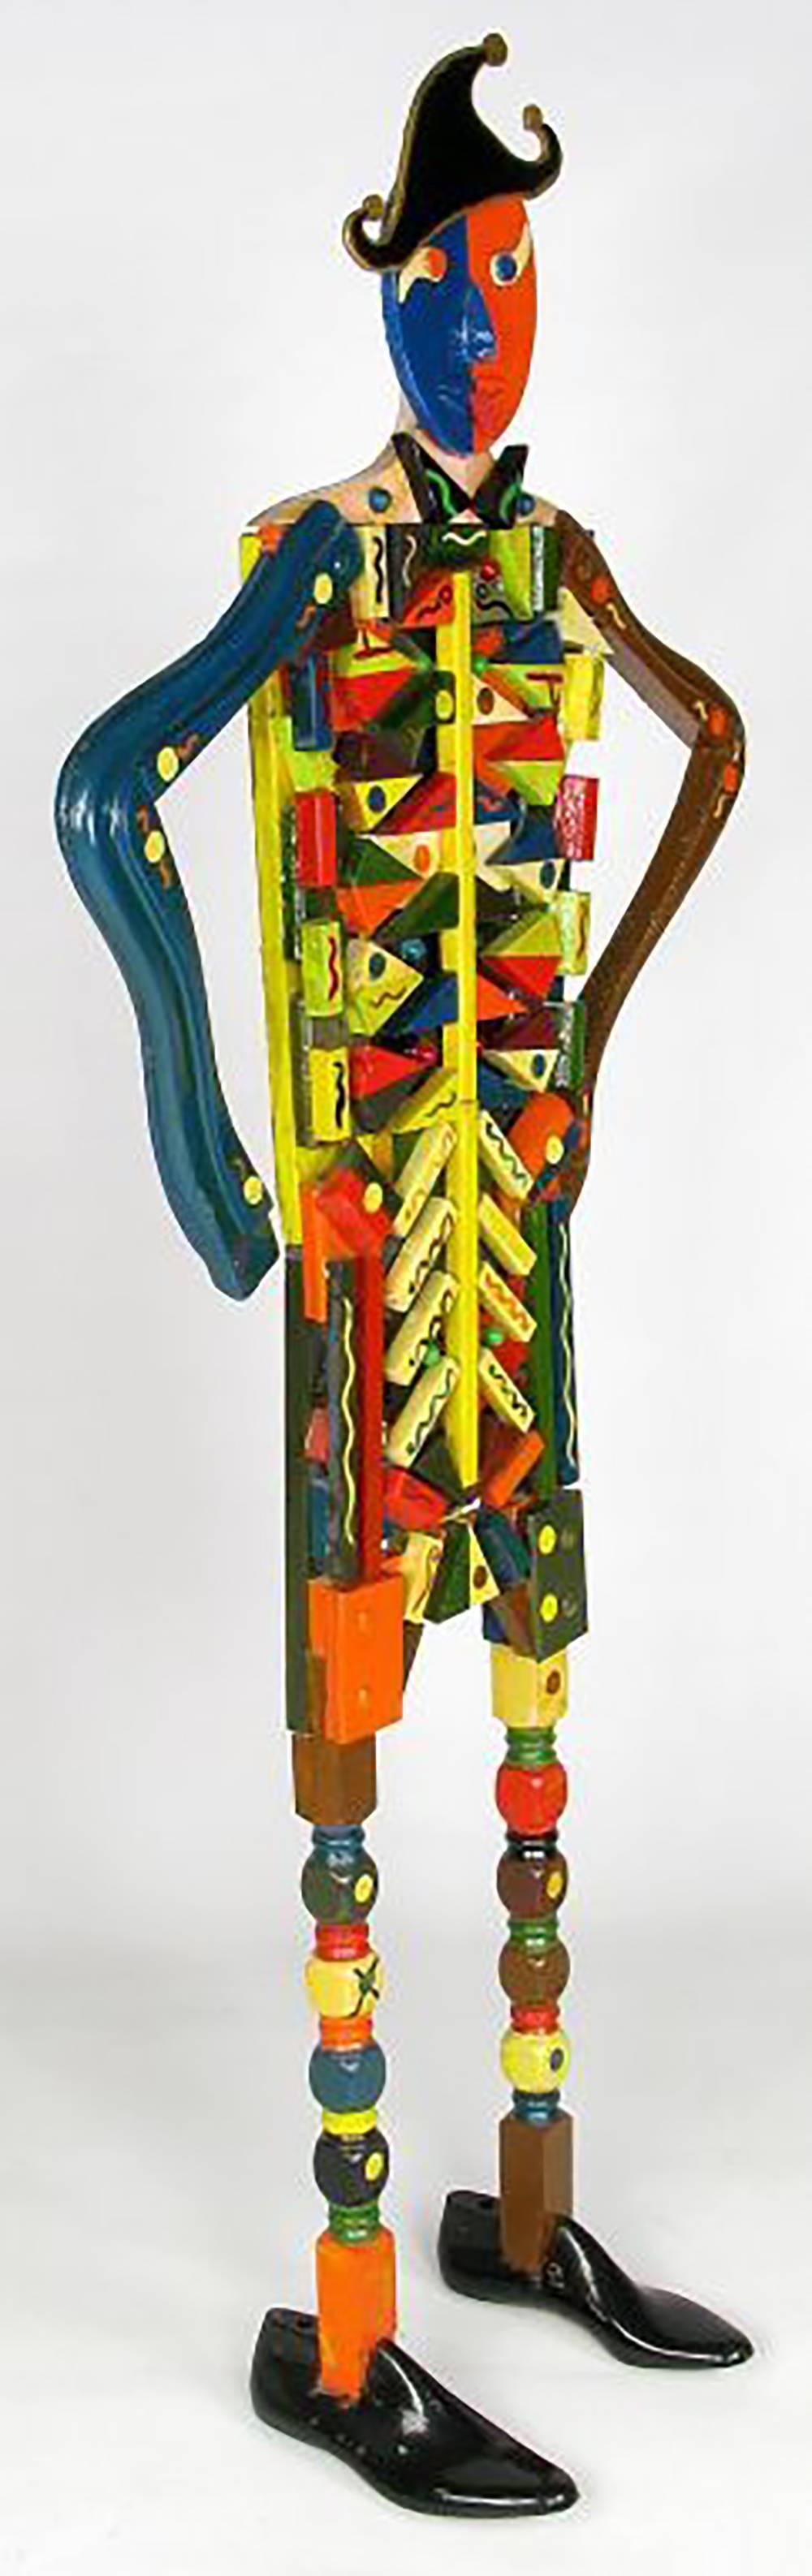 Nearly six feet tall, this one-of-a-kind sculpture is created from carved wood and vibrant multicolored lacquer. Bright reds, blues, greens, yellow, orange and black. Signed 